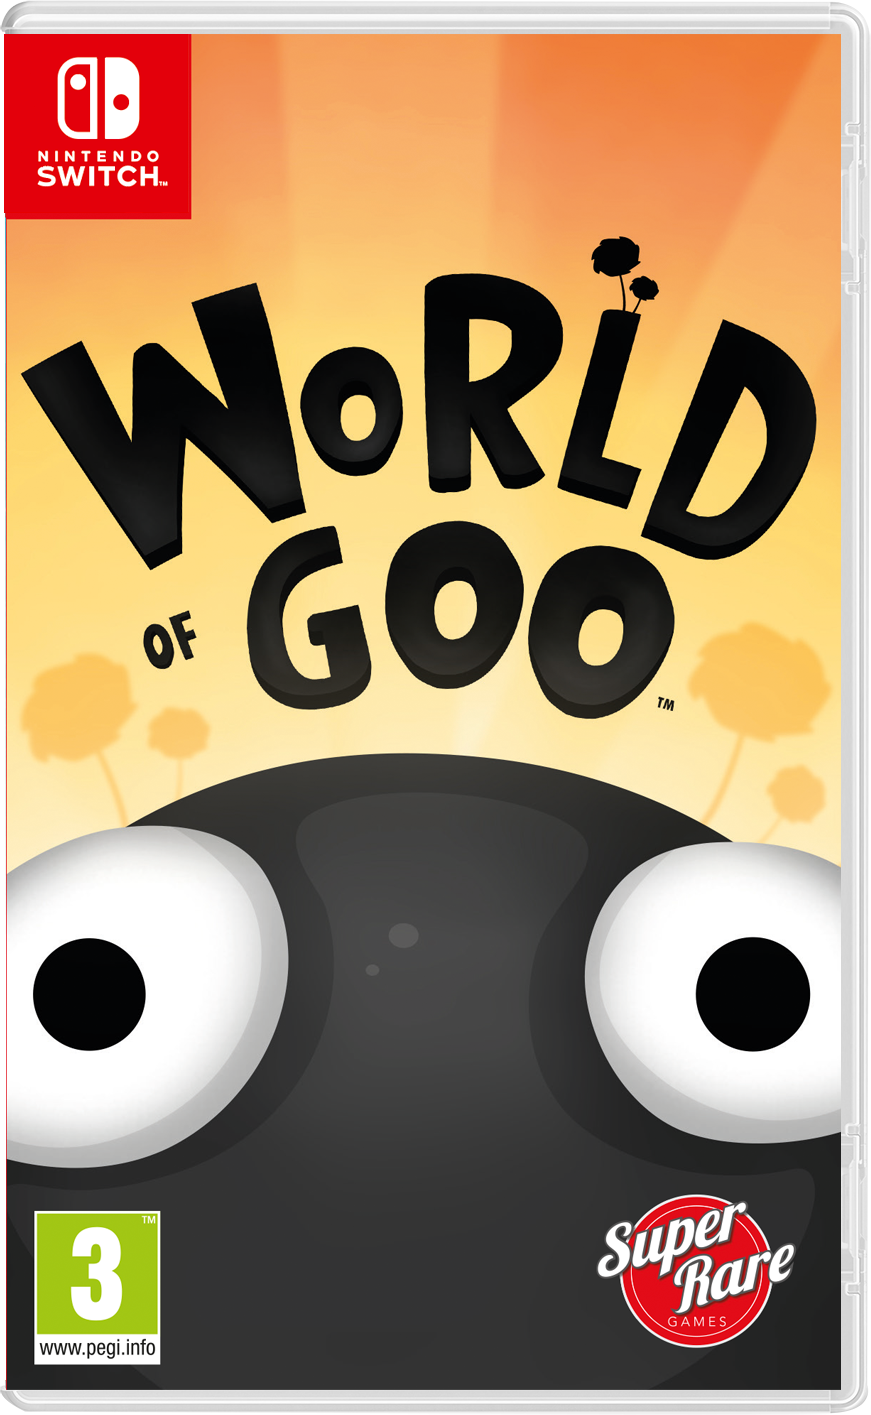 World of Goo for Nintendo Switch - Nintendo Official Site